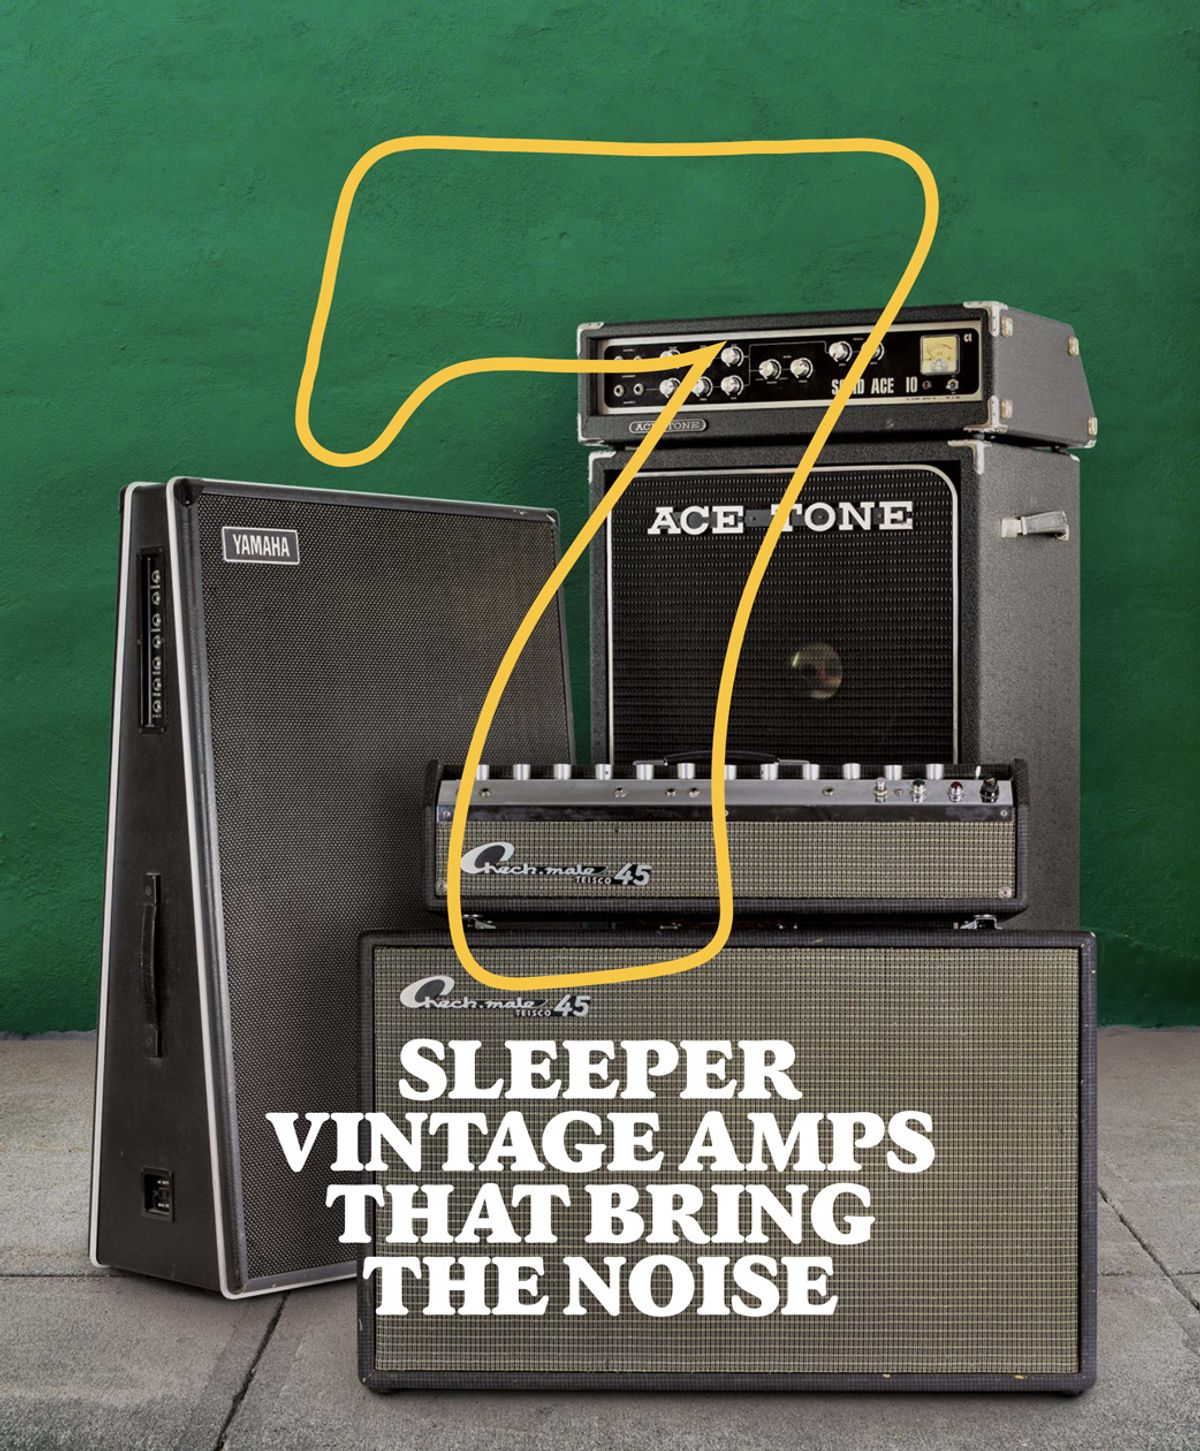 7 Sleeper Vintage Amps That Bring the Noise